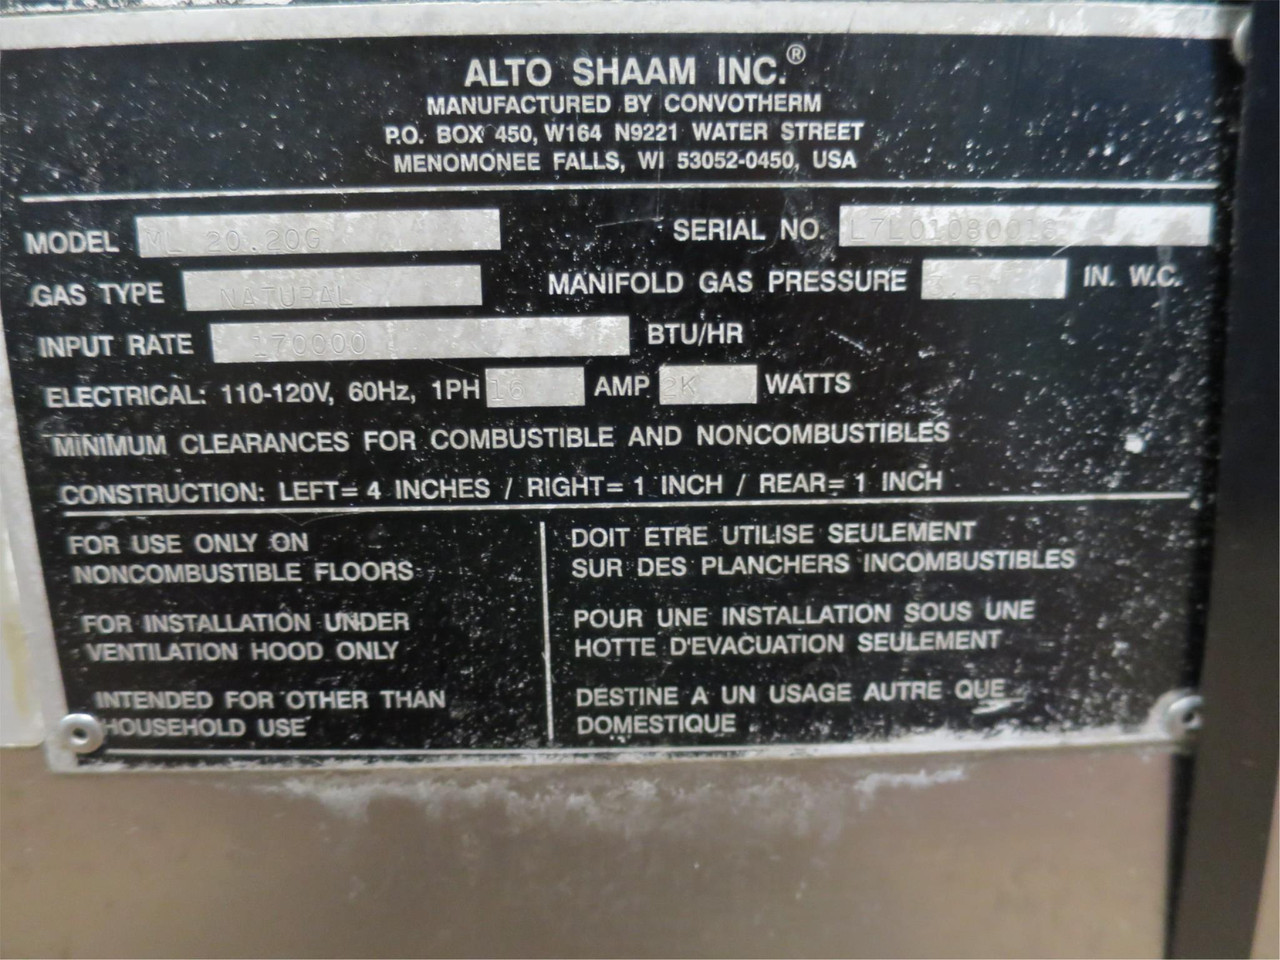 Alto Shaam Natural Gas Combitherm Combo Oven ML20.20G